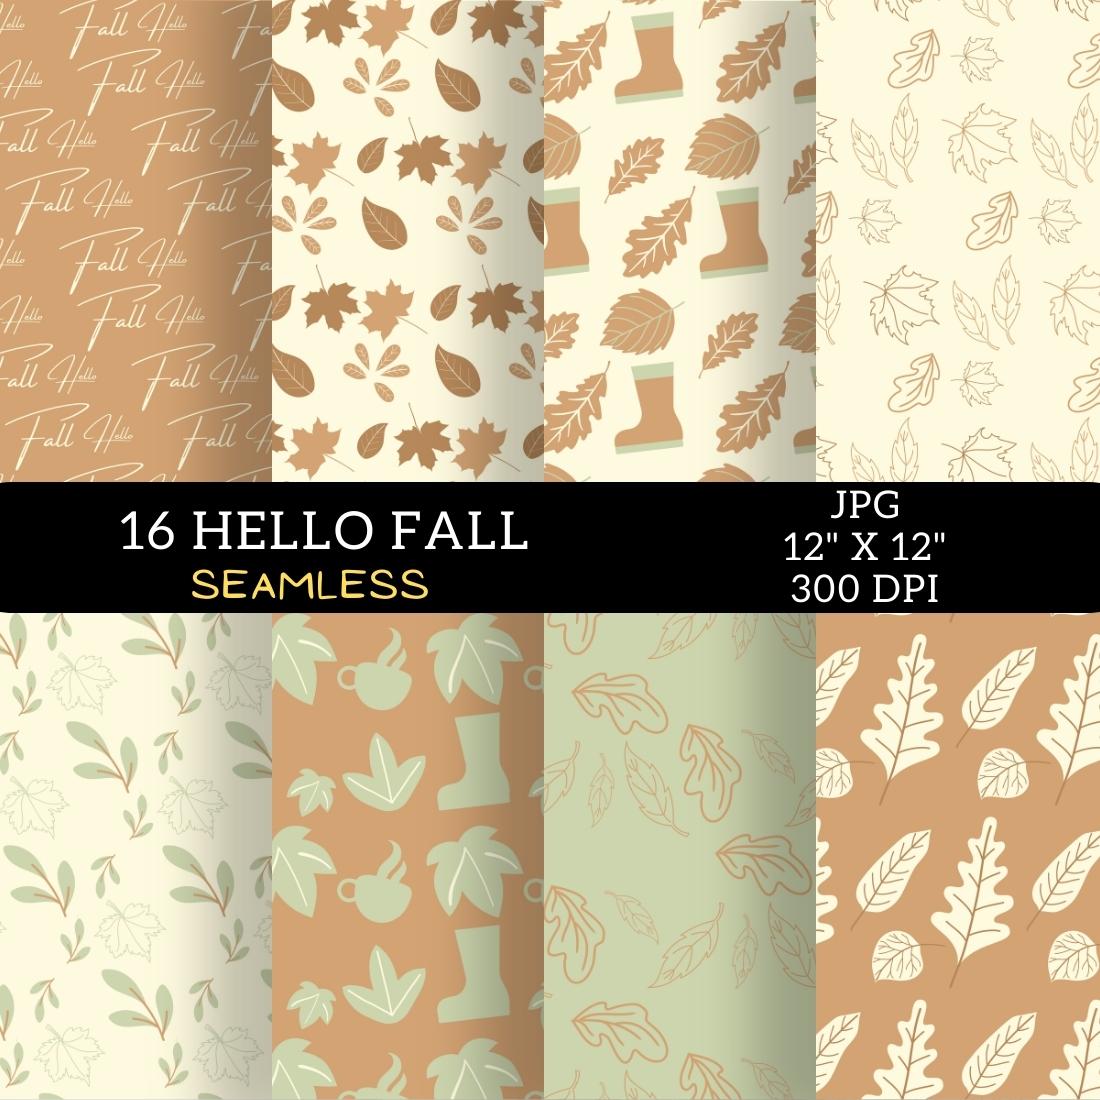 A selection of unique autumn-themed background patterns.